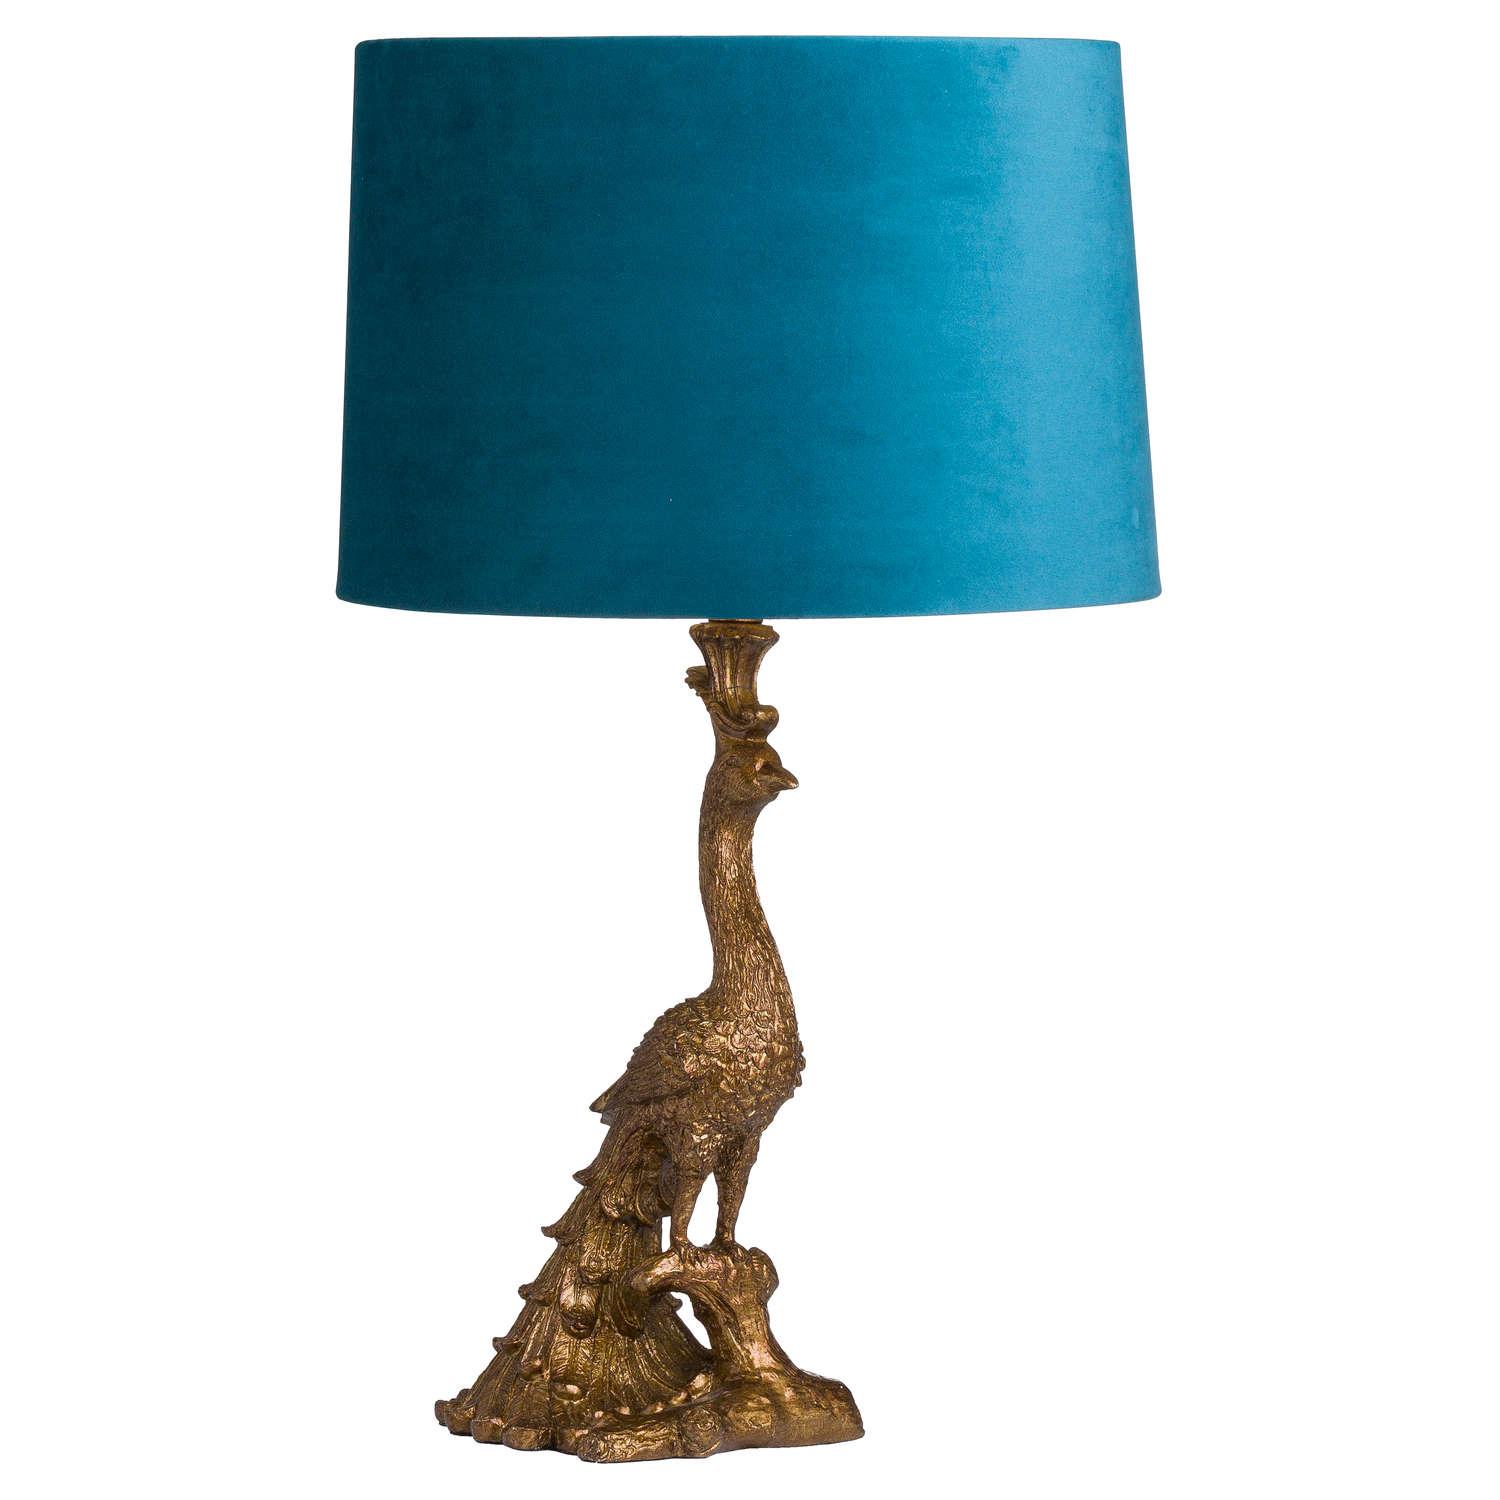 Antique Gold Peacock Lamp With Teal Velvet Shade - Vookoo Lifestyle